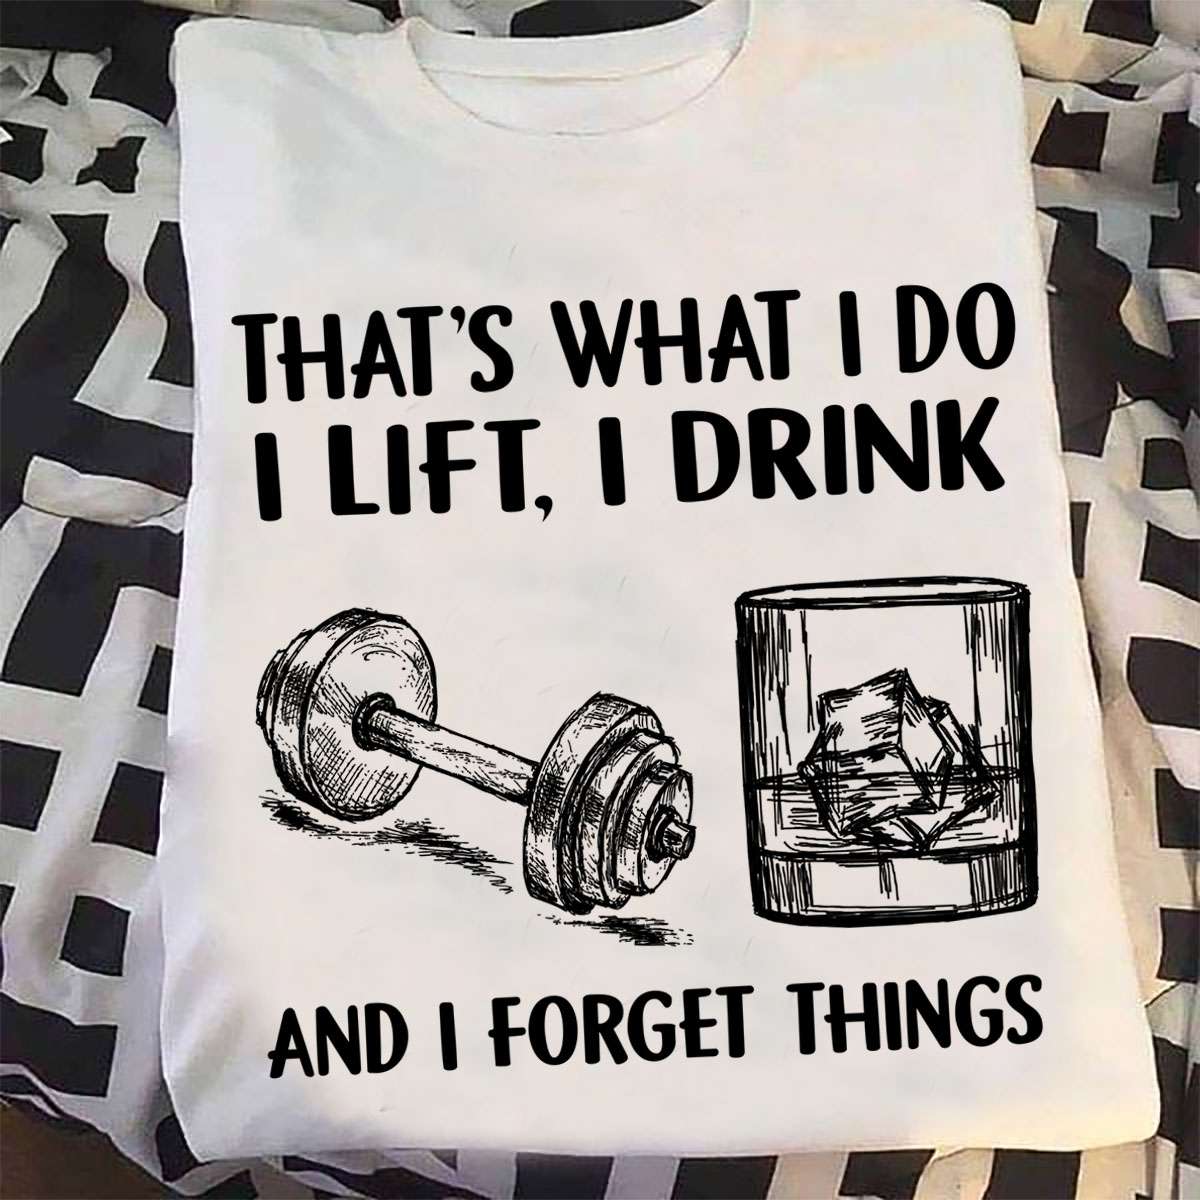 That's what I do I lift, I drink and I forget things - Lifting iron, drinking wine